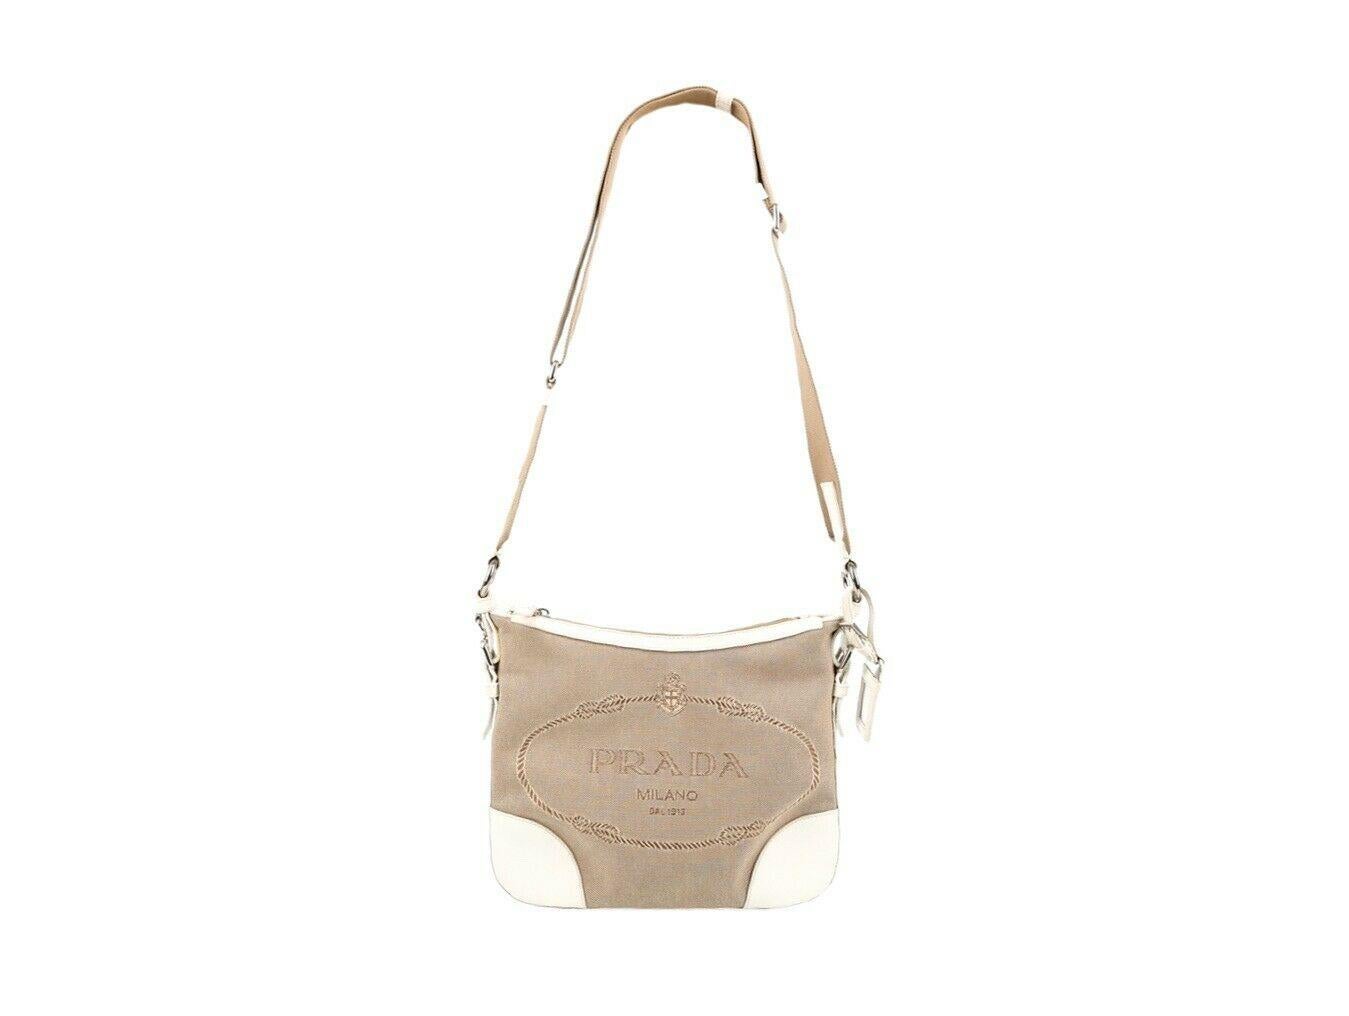 This Prada Canapa crossbody bag in beige and white is divine. Wear as a crossbody or shoulder bag. A preloved bag in good condition - please see photos.

Colour
Beige-White
Metal Material
Leather, Canvas
Hardware
Silver
Condition
Used-Good
Height /